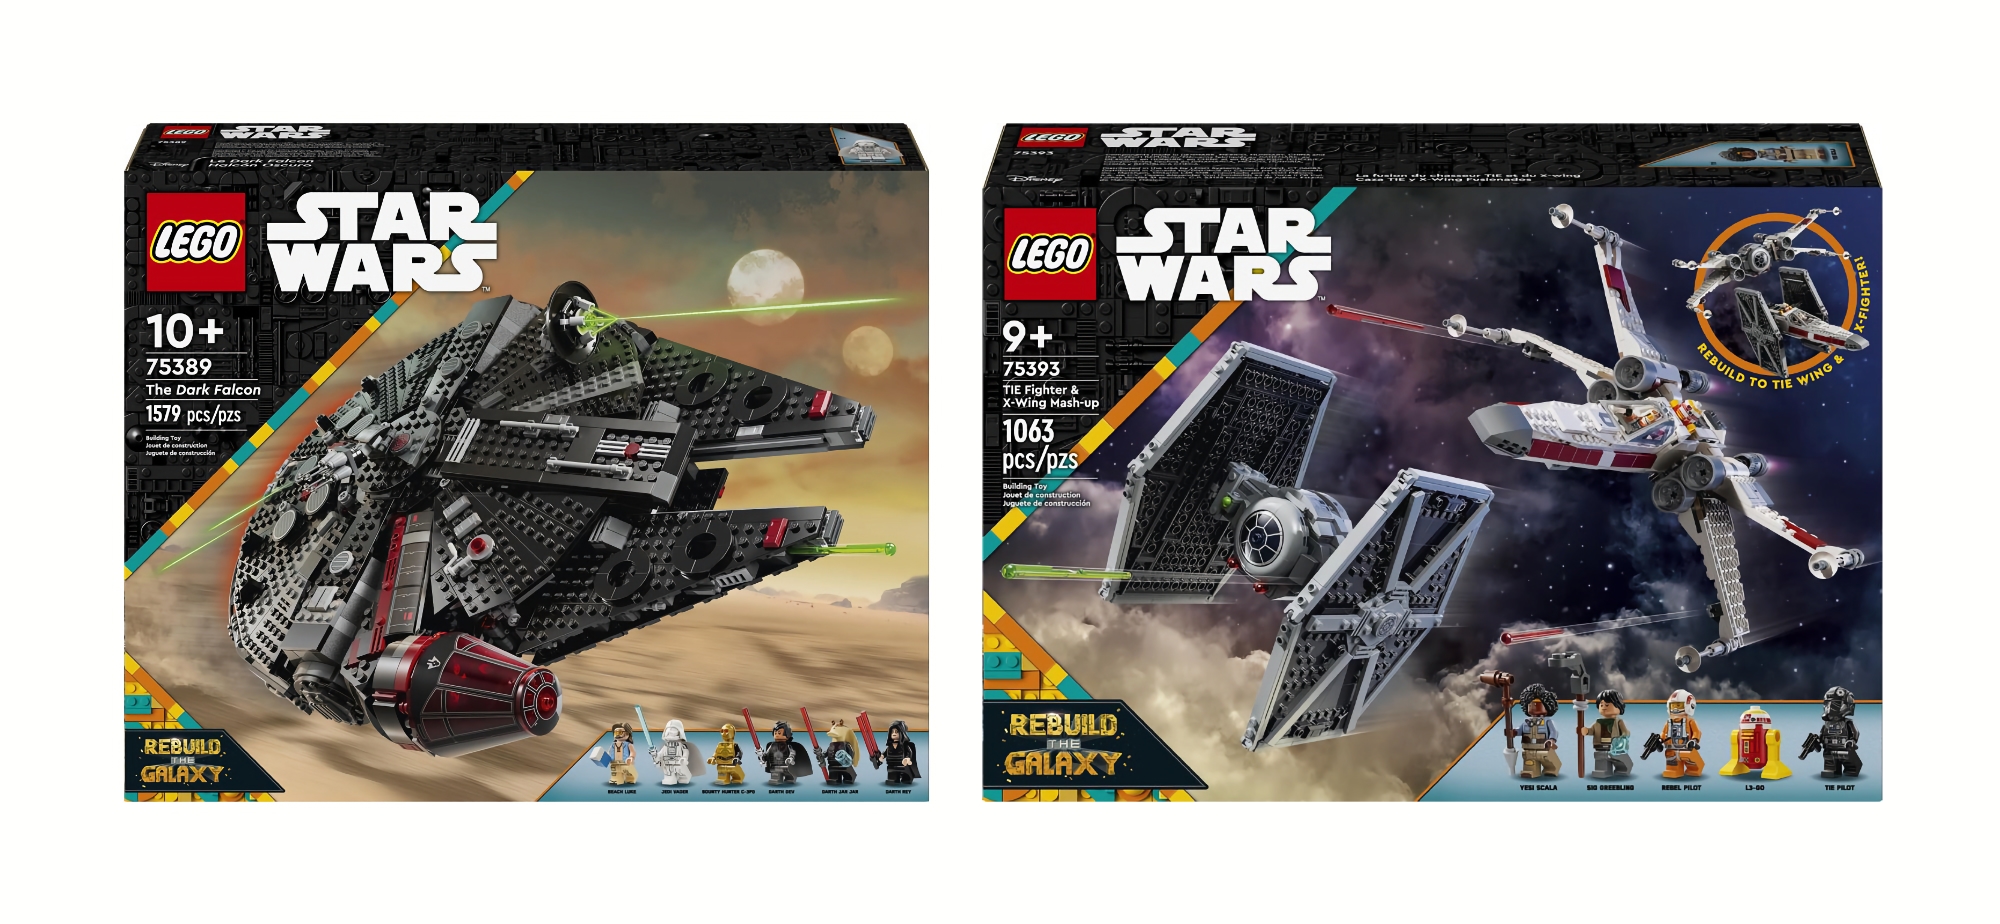 The Dark Falcon and TIE Fighter & X-Wing Mash-up: LEGO prepares to release two Star Wars: Rebuild the Galaxy sets